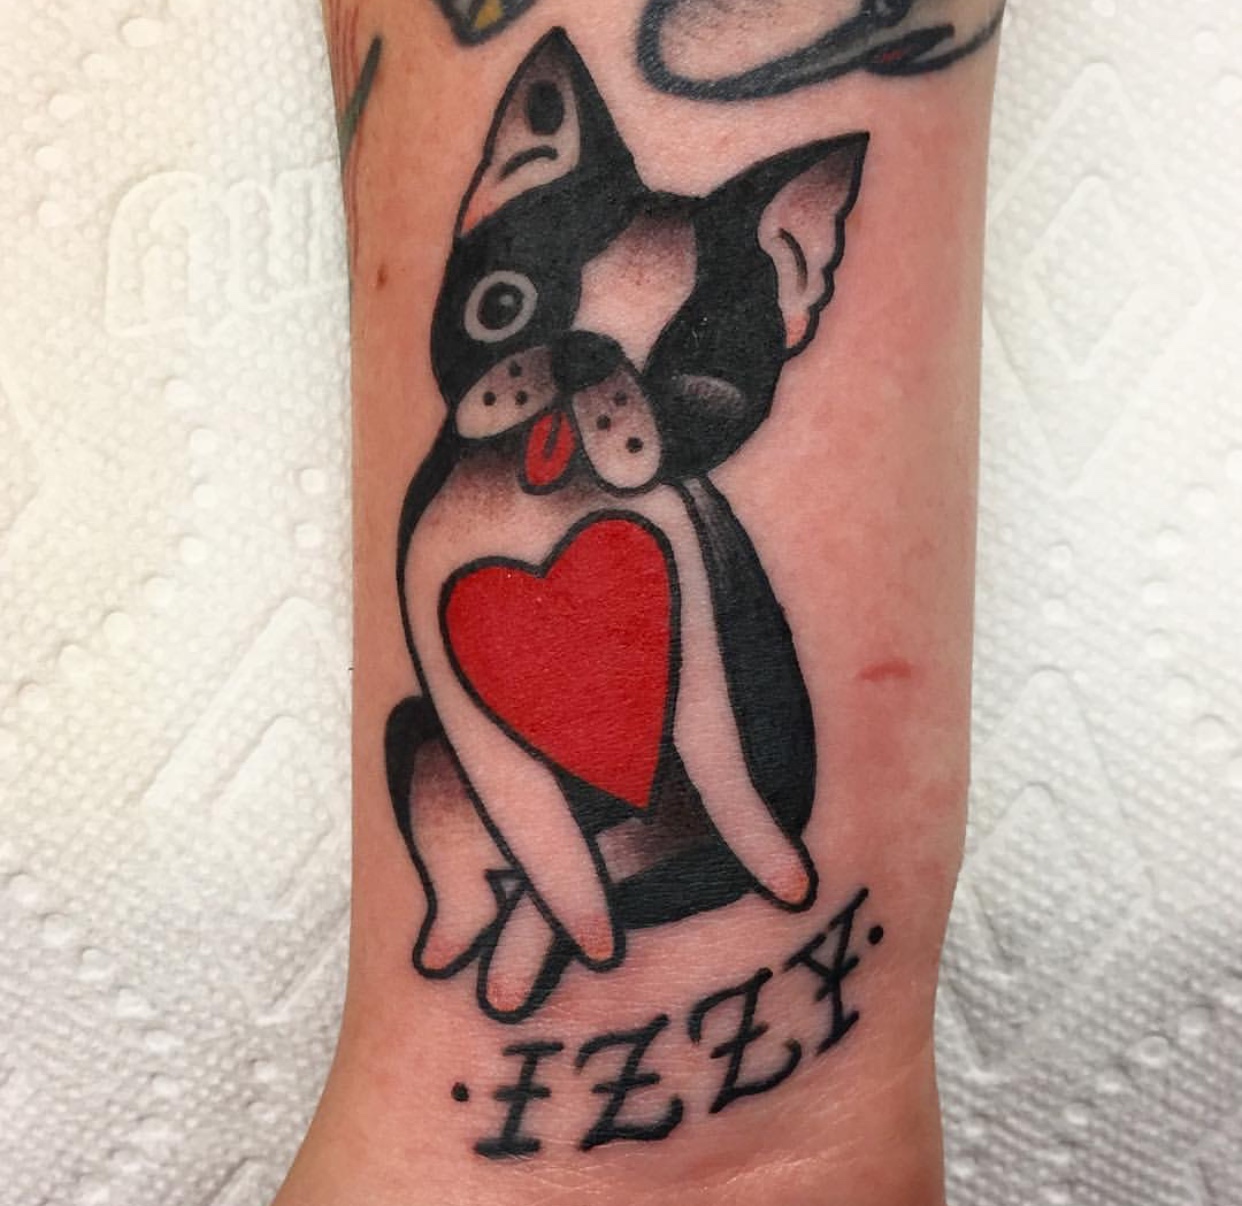 animated winking Boston Terrier with a red heart in its chest tattoo